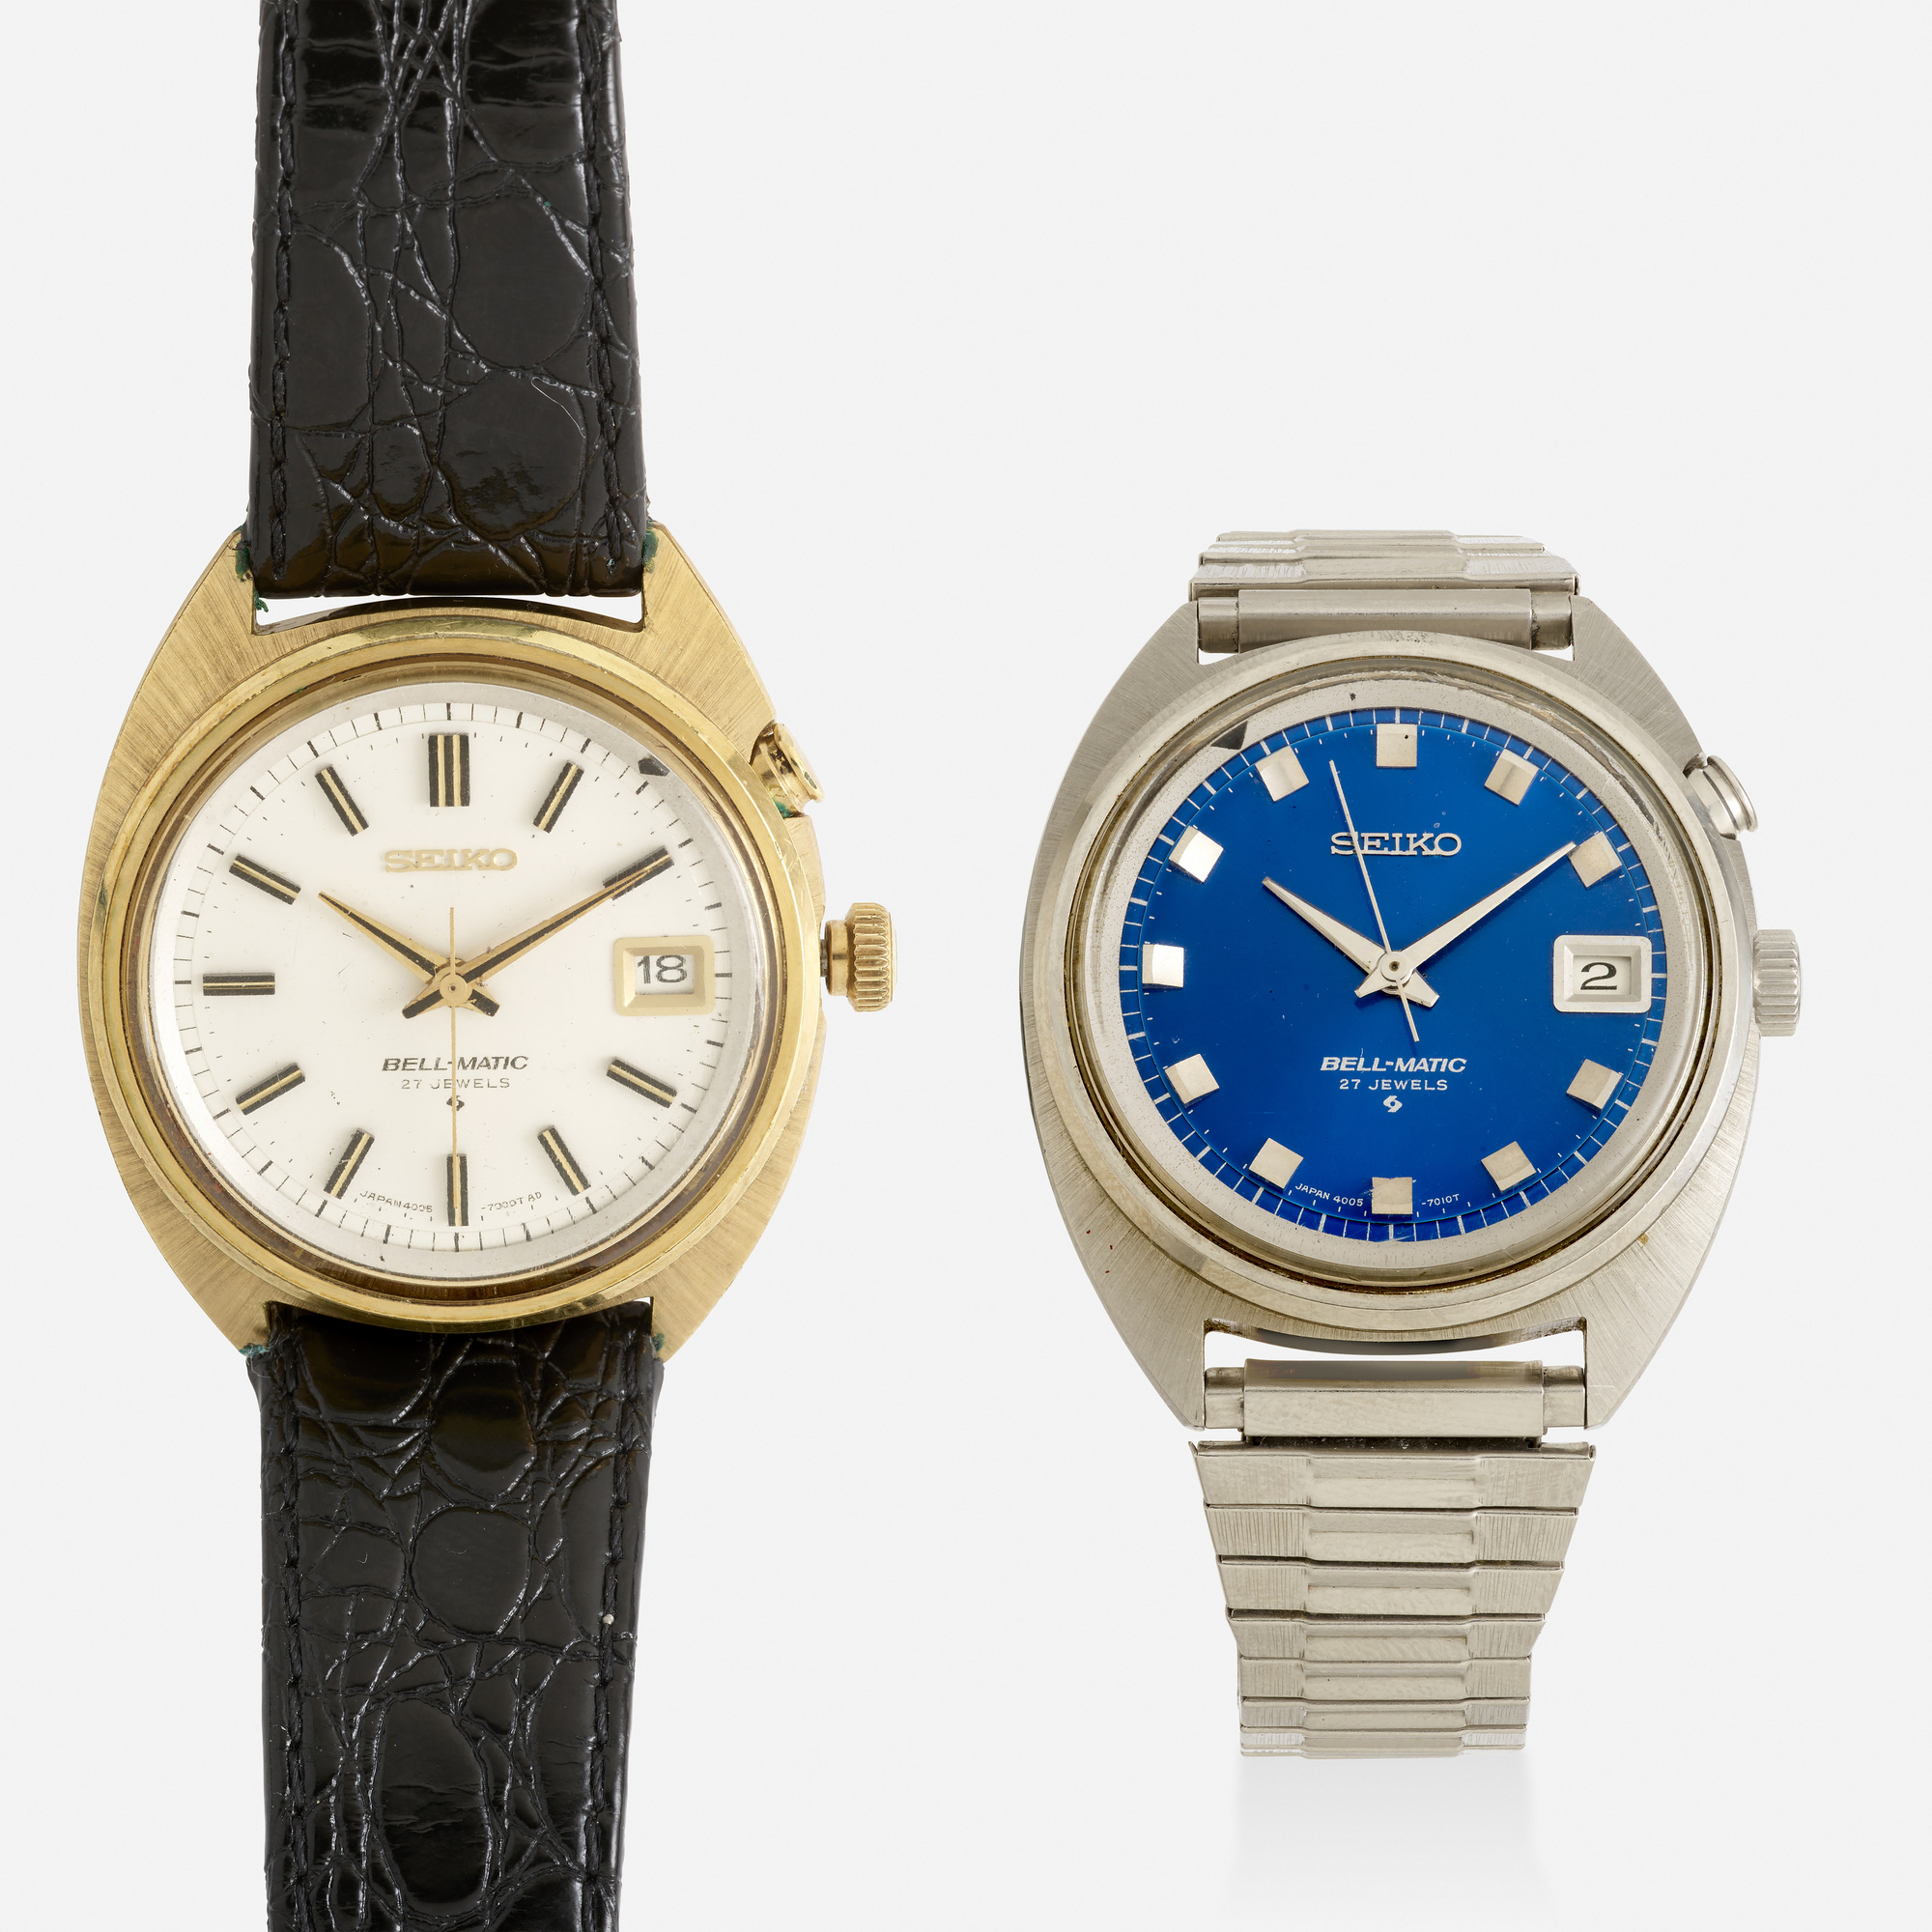 530: SEIKO, Two 'Bell-Matic' wristwatches, Ref. 4005-7000 < Watches, 8  February 2023 < Auctions | Rago Auctions